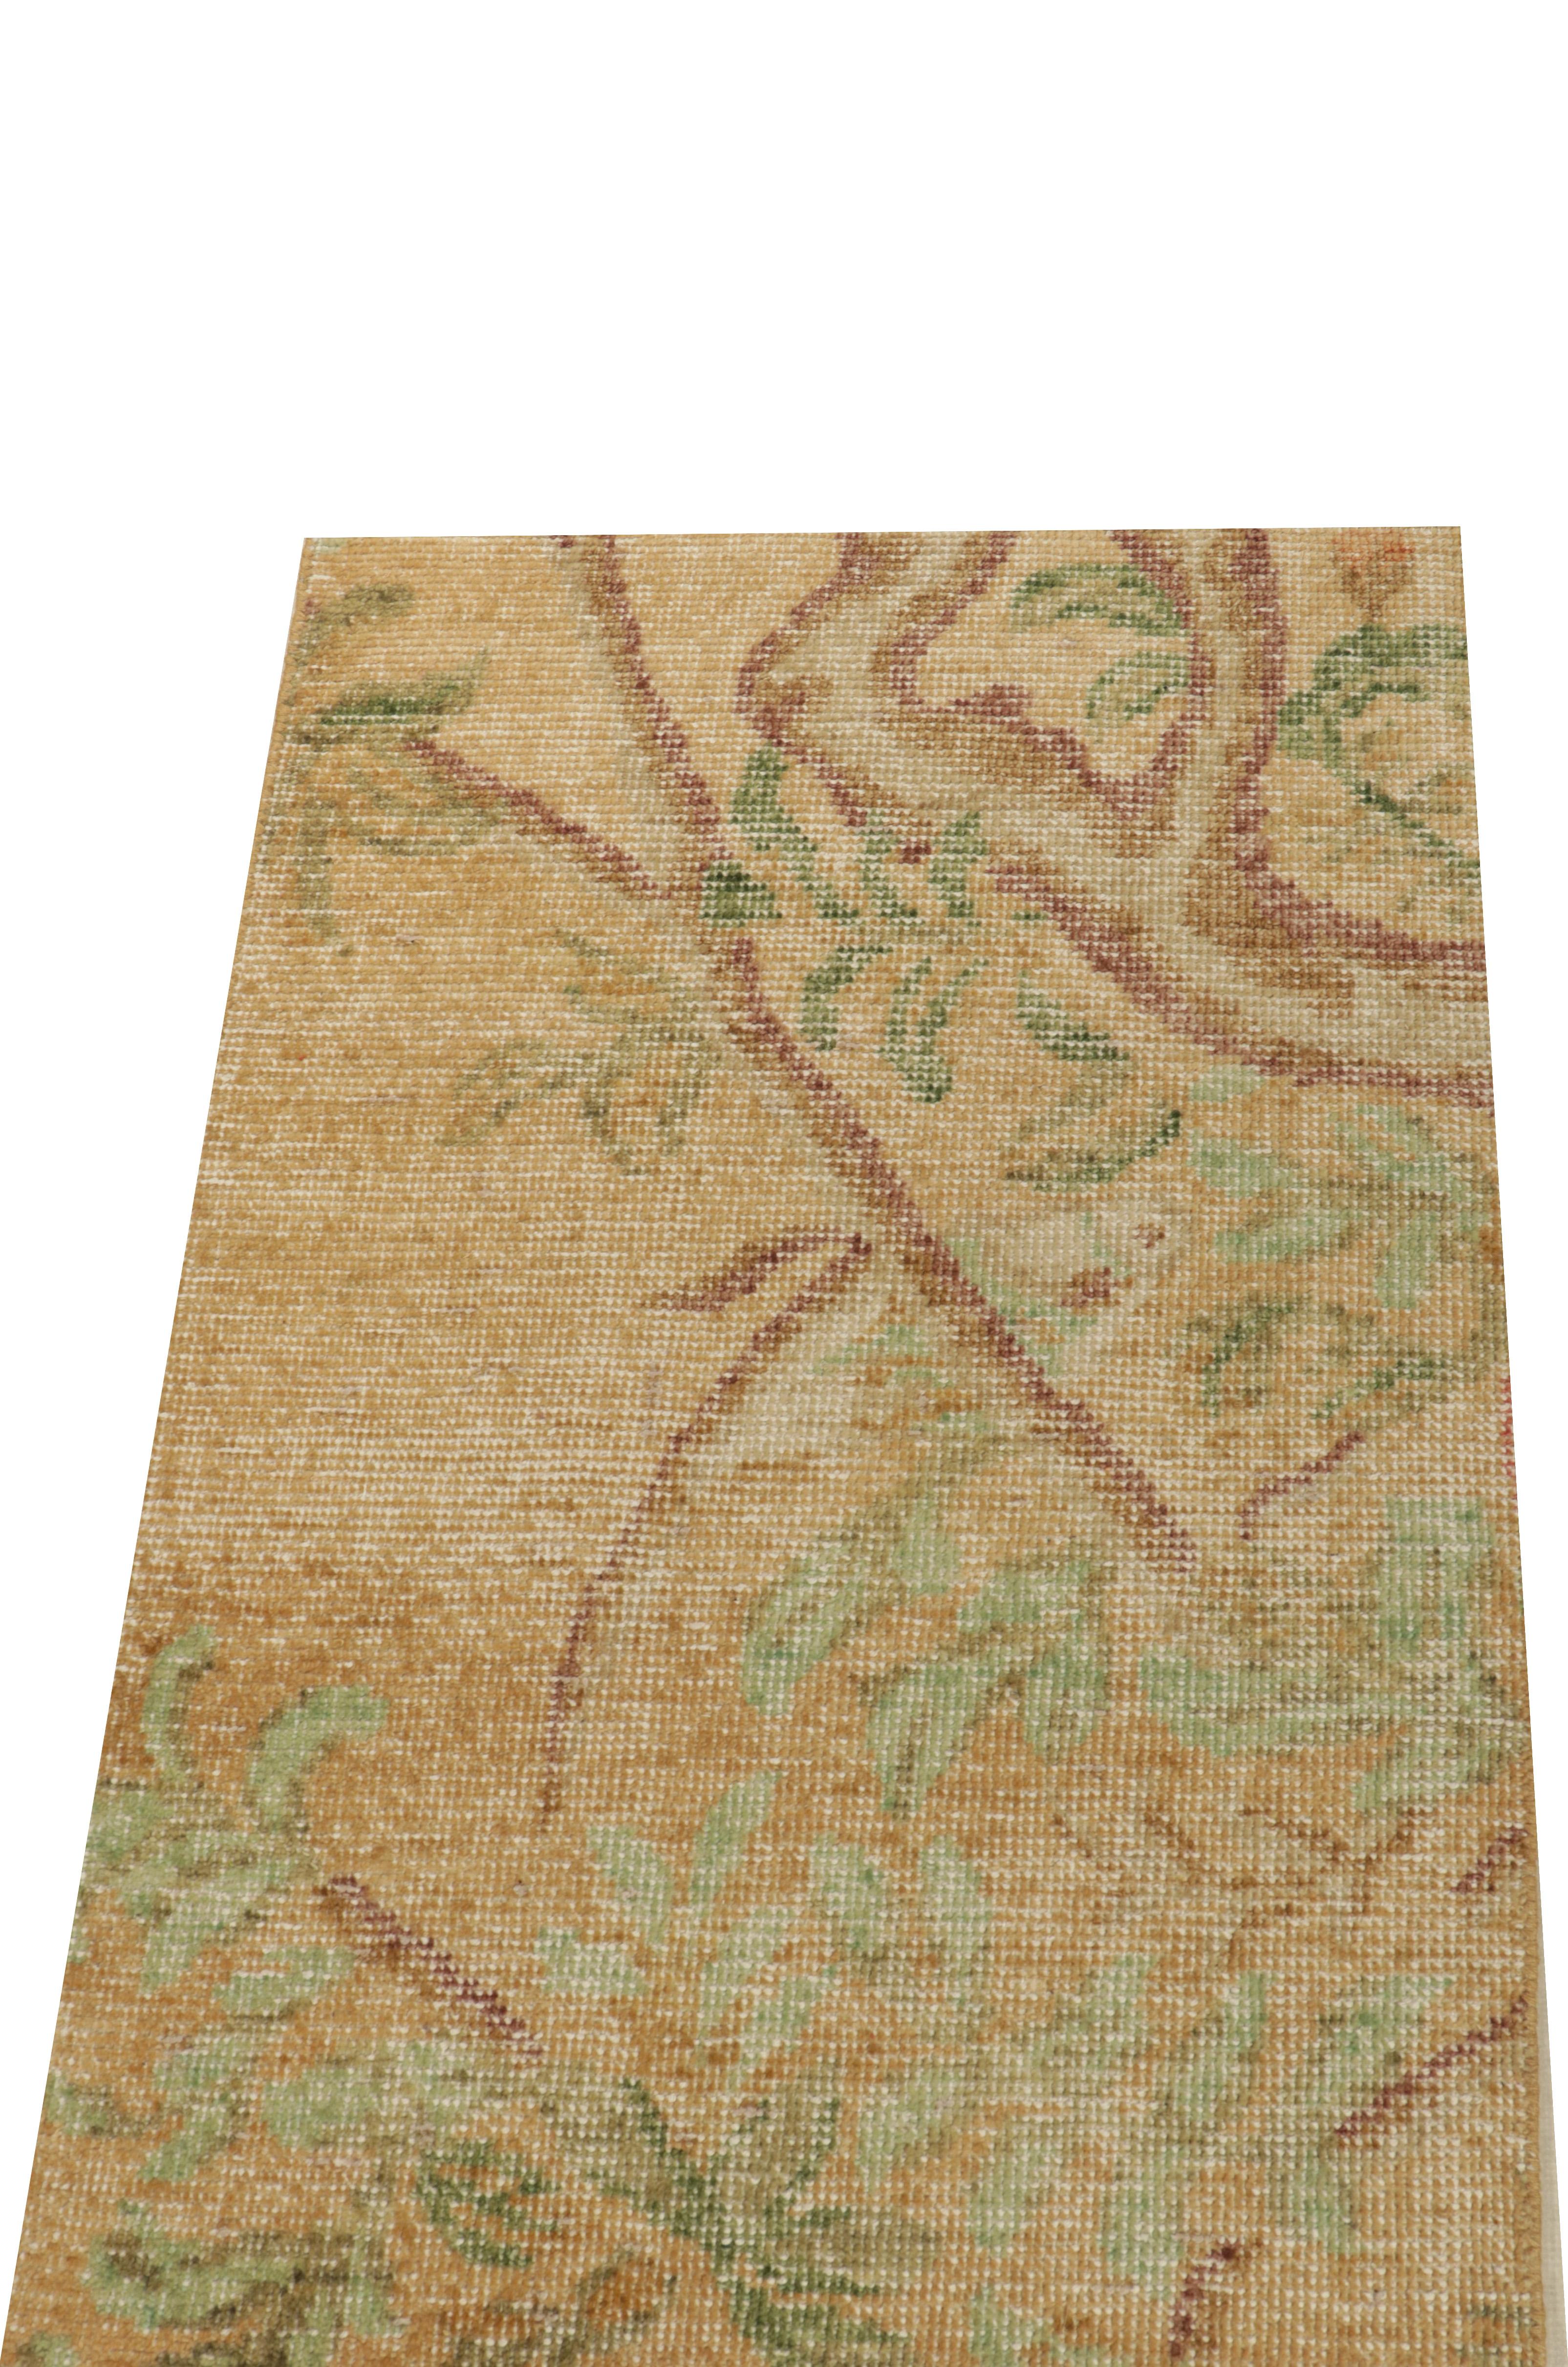 This 2x3 rug hails from the gift-size selections of Rug & Kilim’s Homage Collection, remarking a bold take on distressed style. This design evokes botanical moods with beige-brown branches and green florals atop a golden undertone. 

An ideal